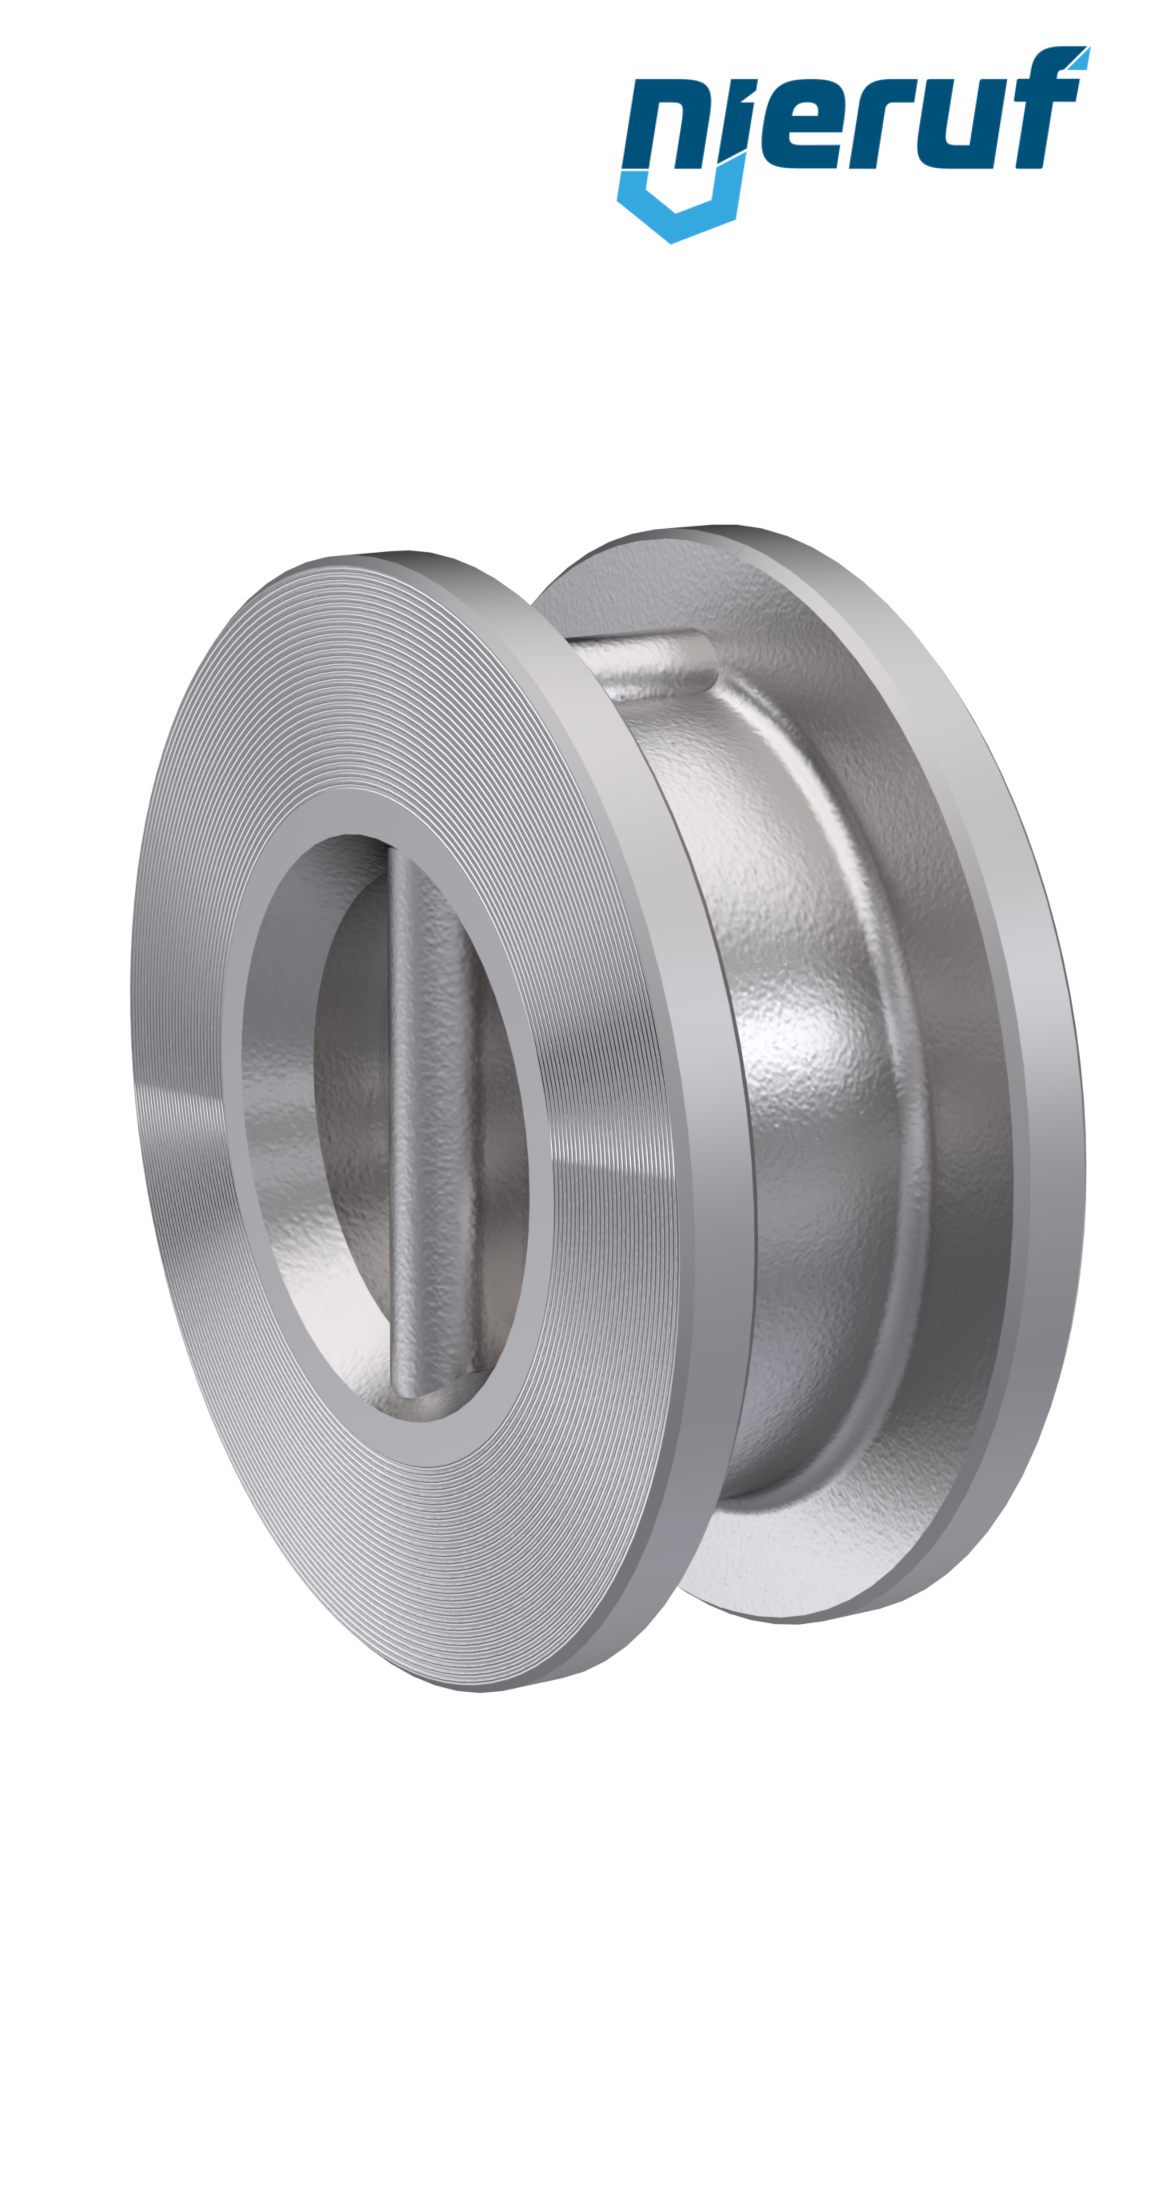 dual plate check valve DN400 DR03 ANSI 150 stainless steel 1.4408 metal